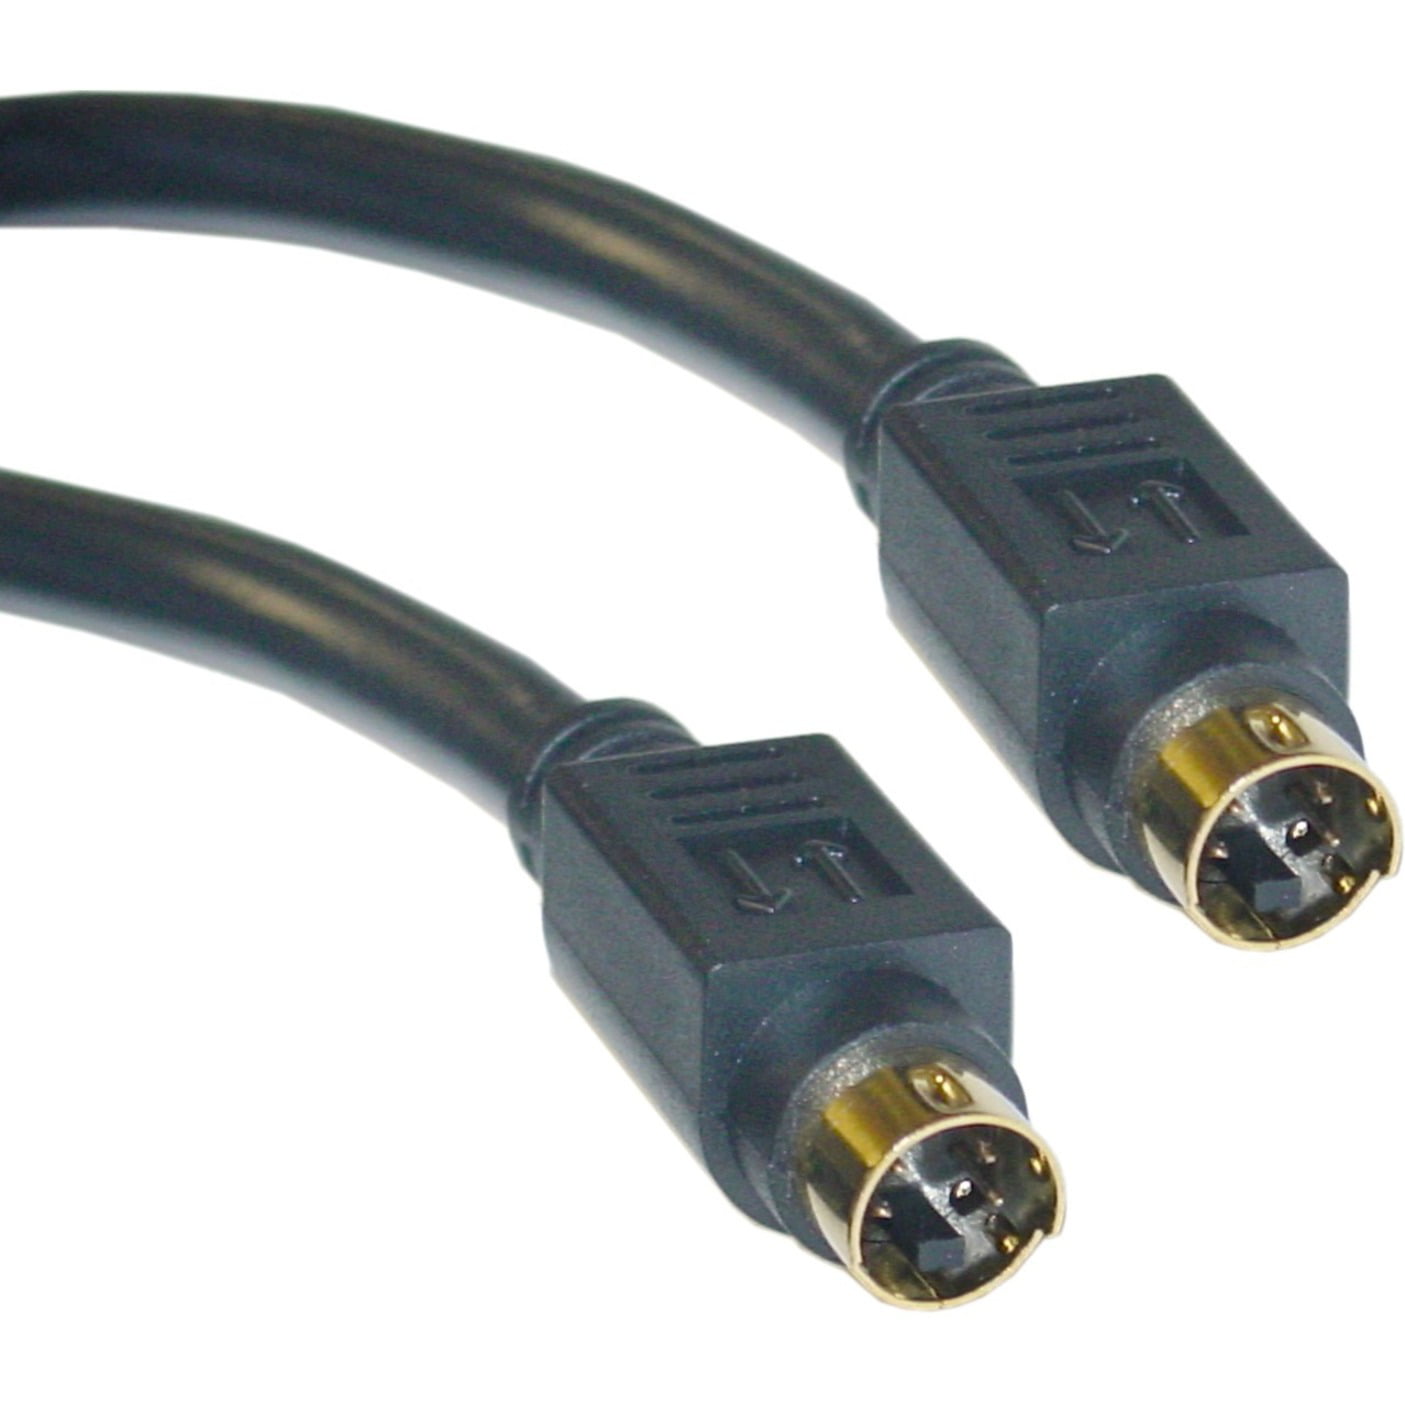 Pearstone Gold Series Premium S-Video Male to S-Video Male Video Cable .5 m 1.5 